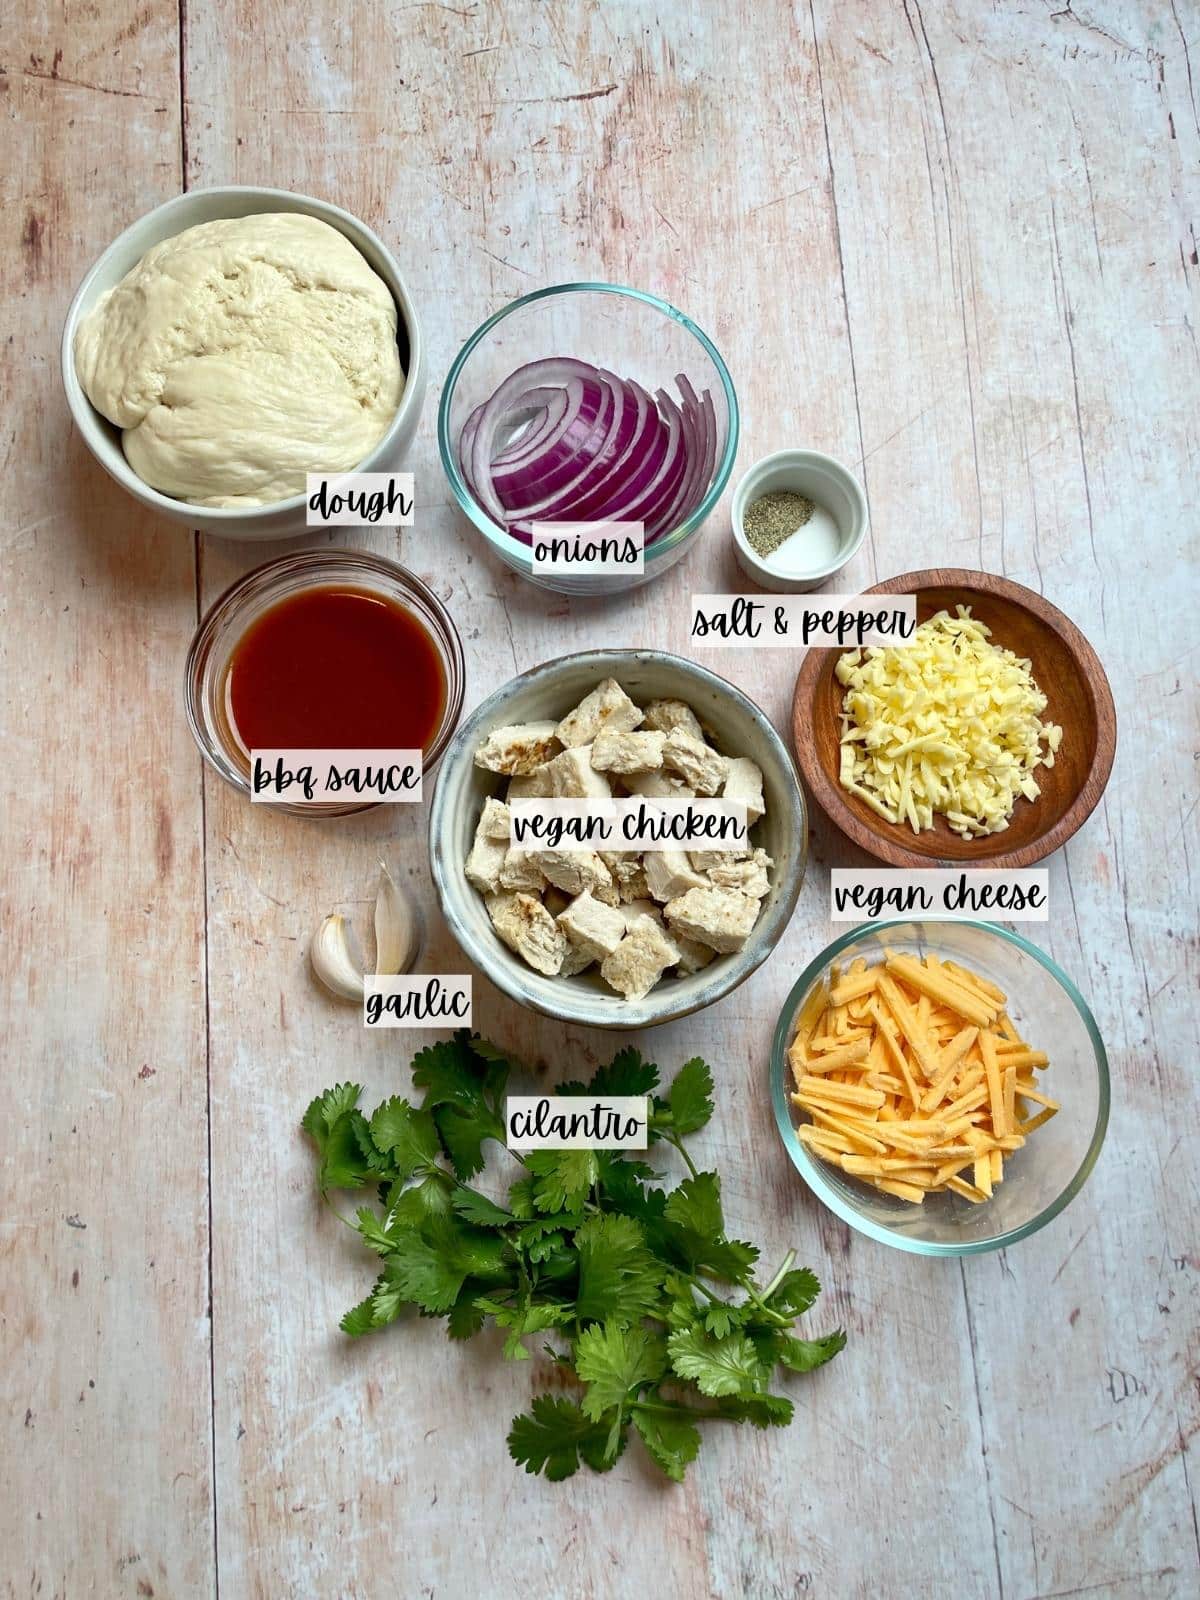 Labeled ingredients for bbq pizza.